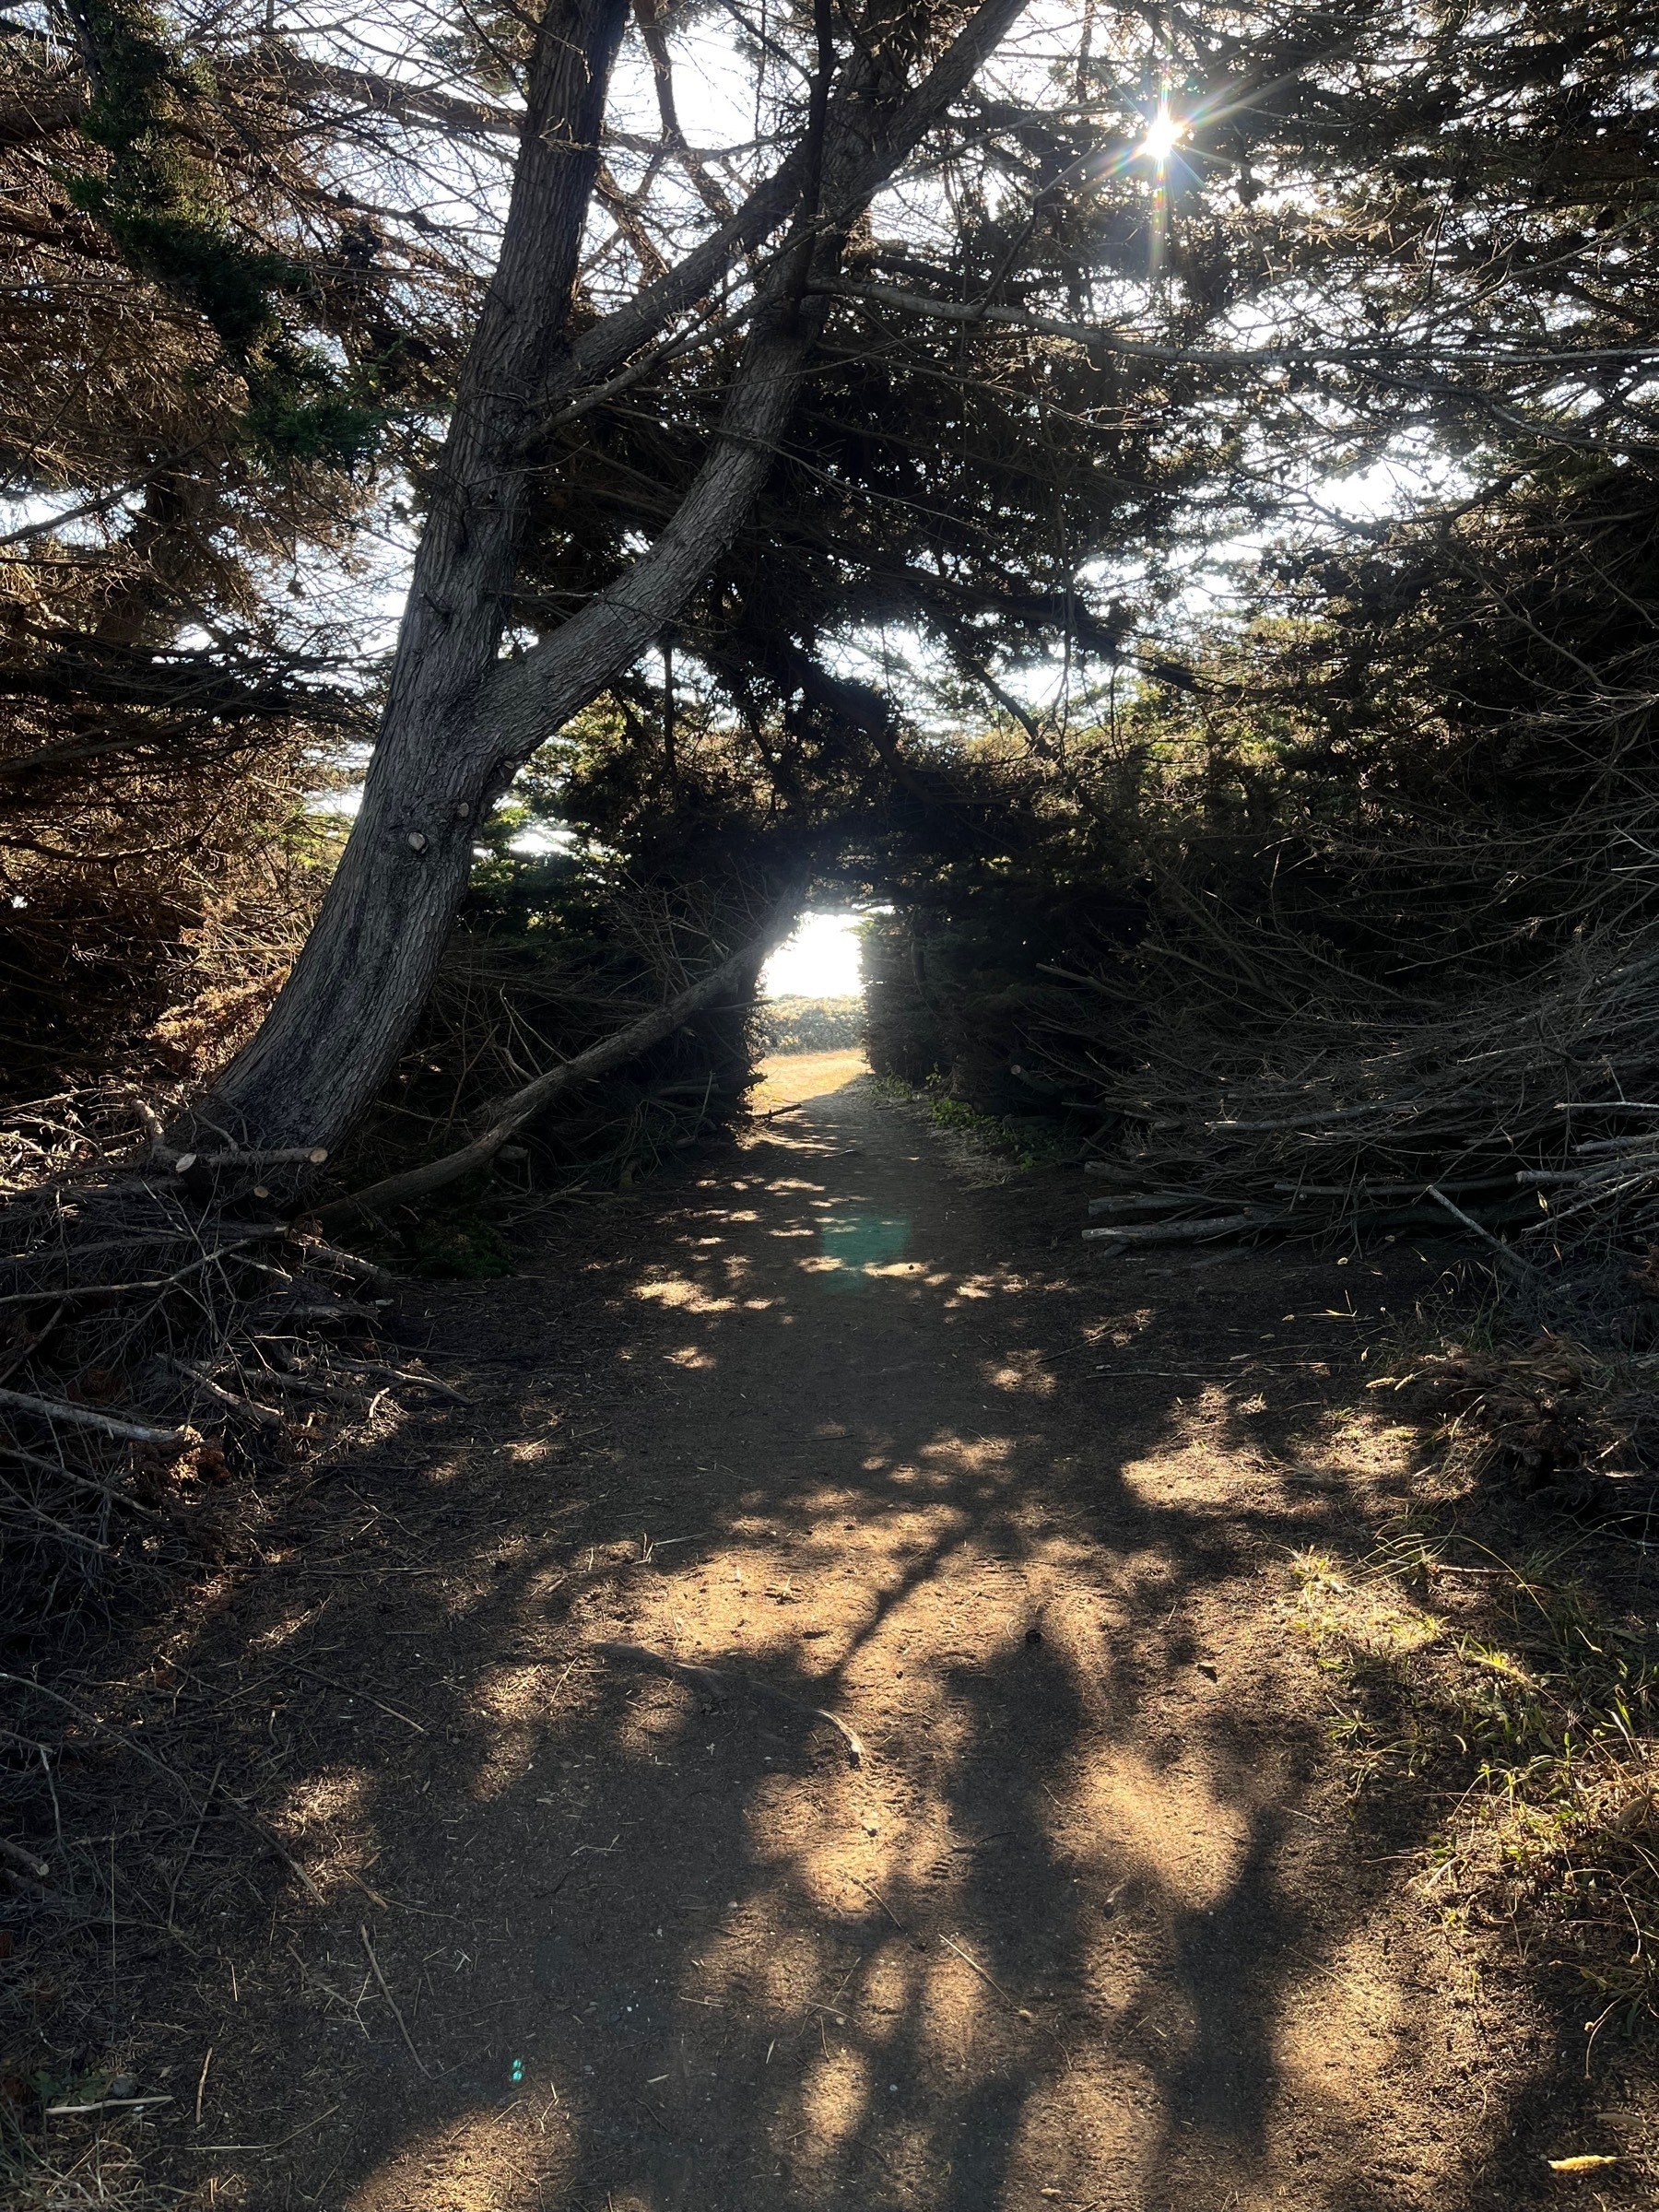 A path running through a tunnel of Cyprus trees on the Northern California coast